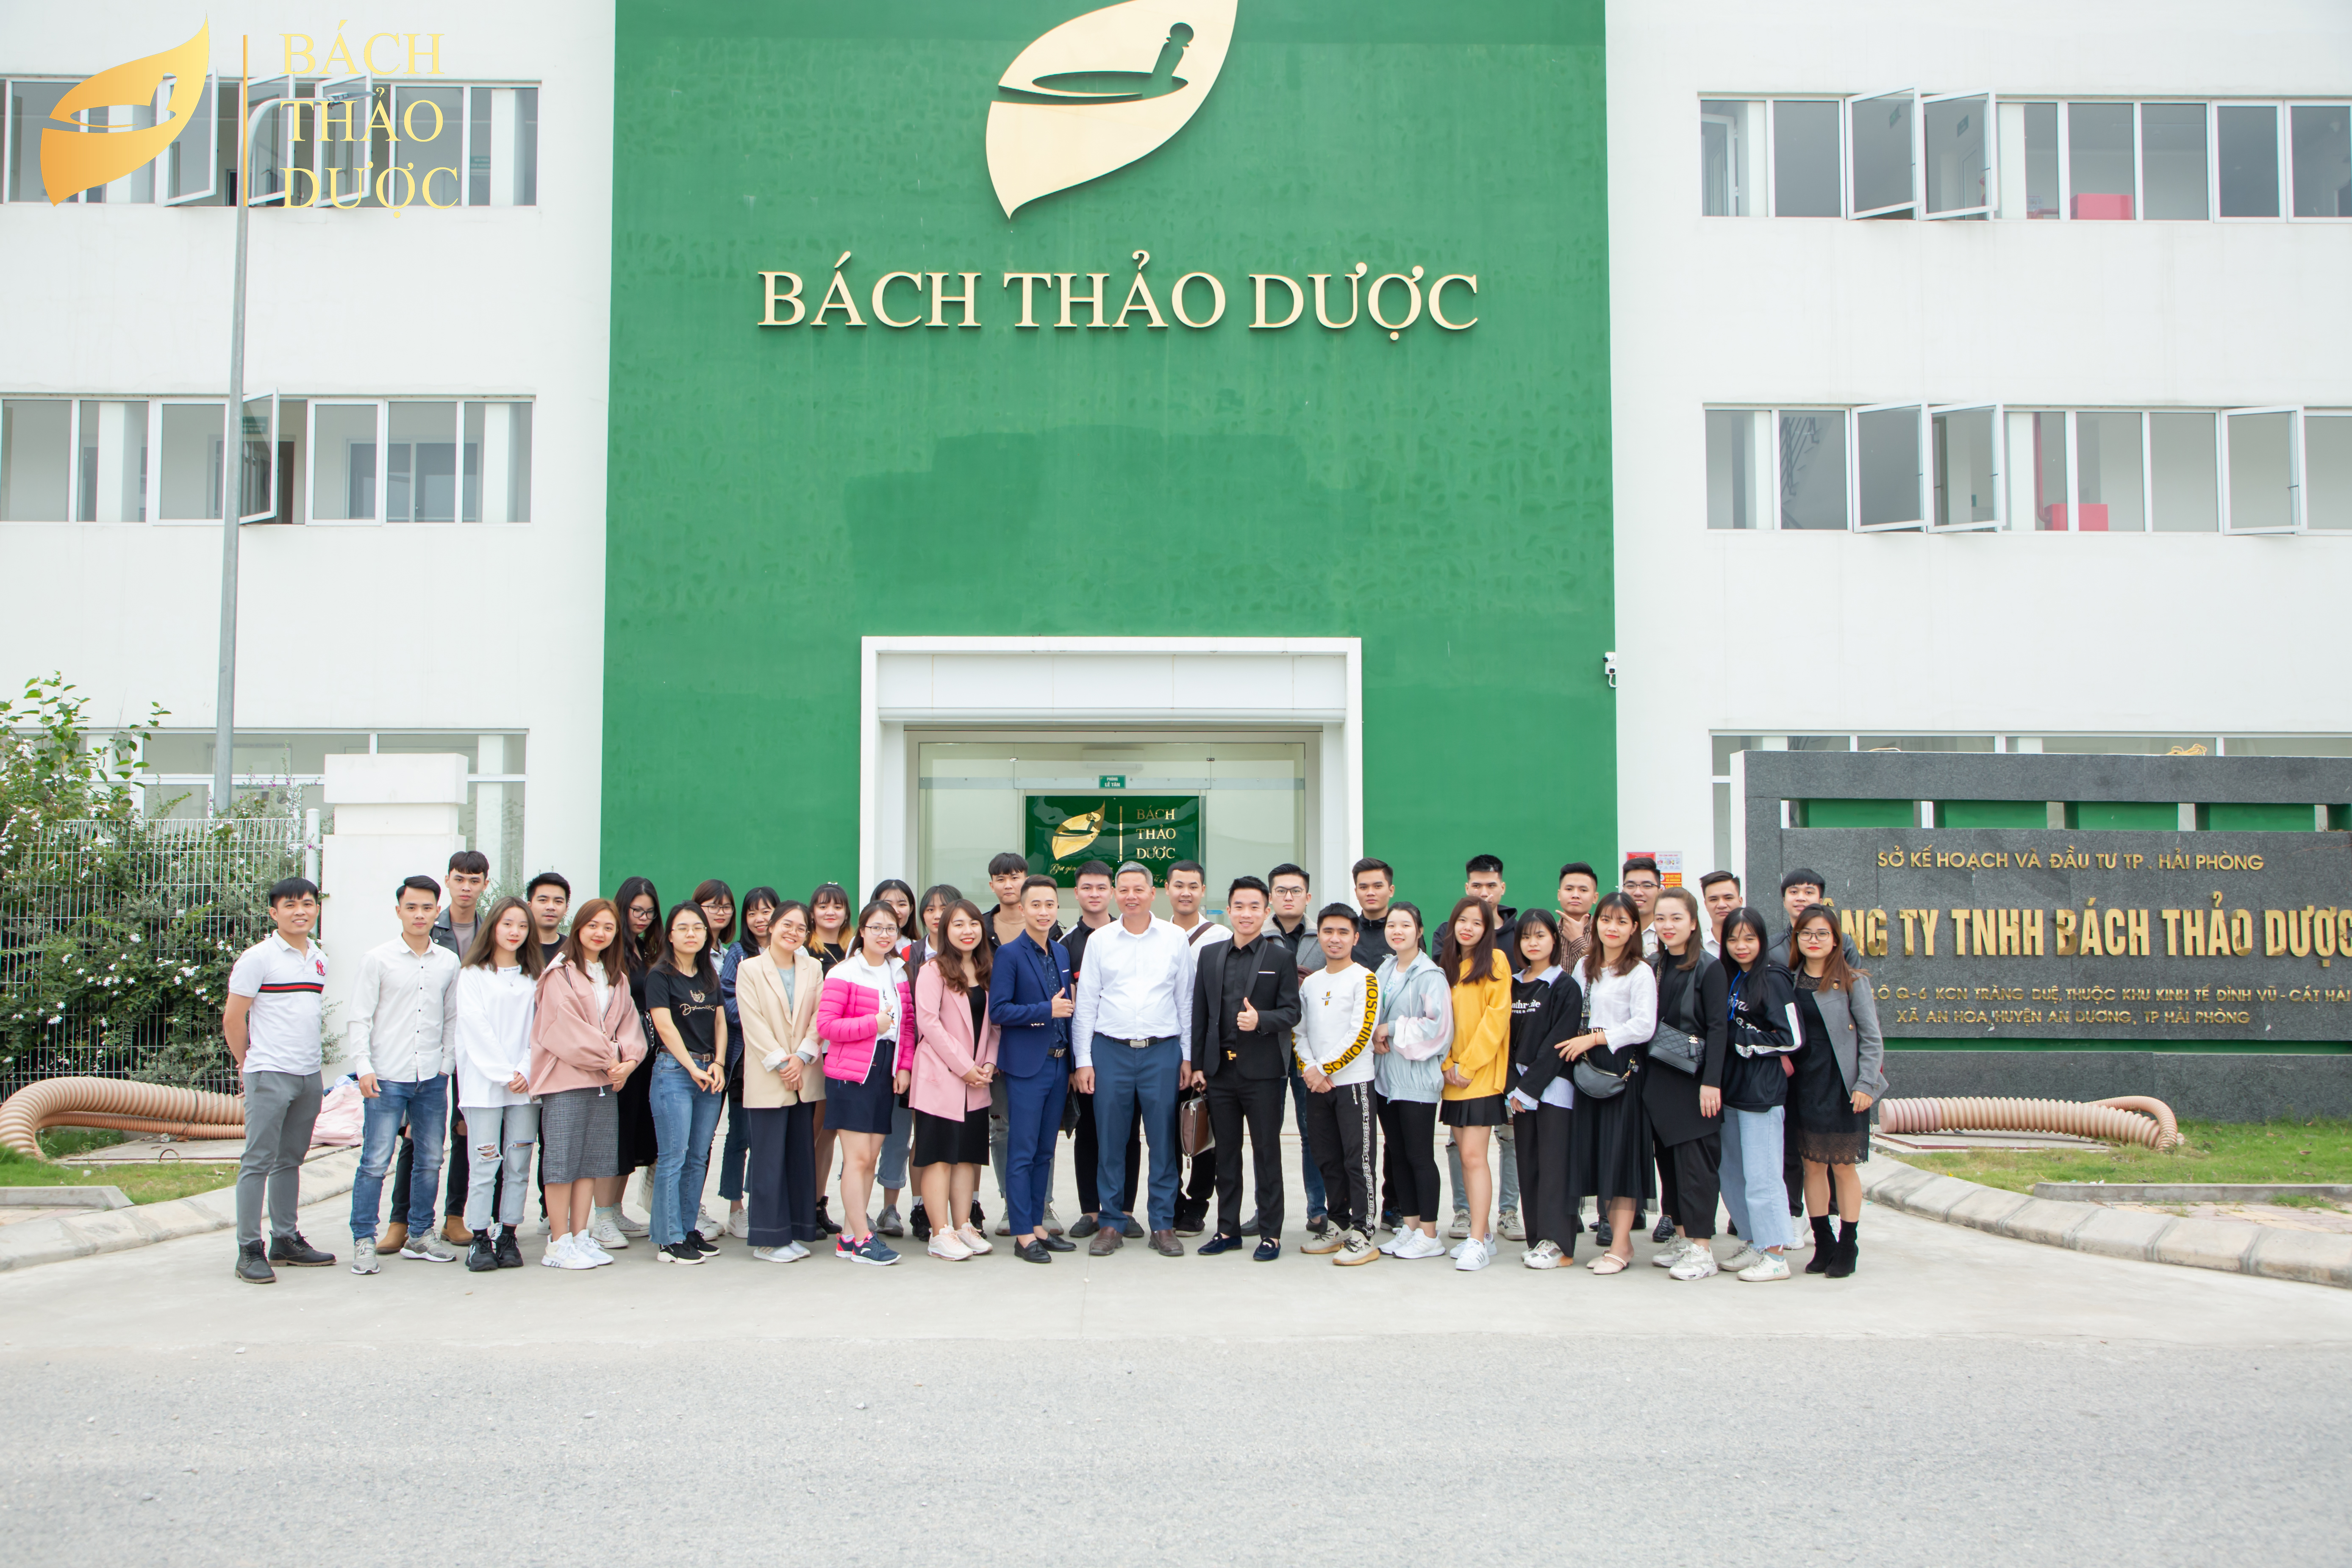 Winfa Limited Company was visited Bach Thao Duoc factory and attended a professional training session